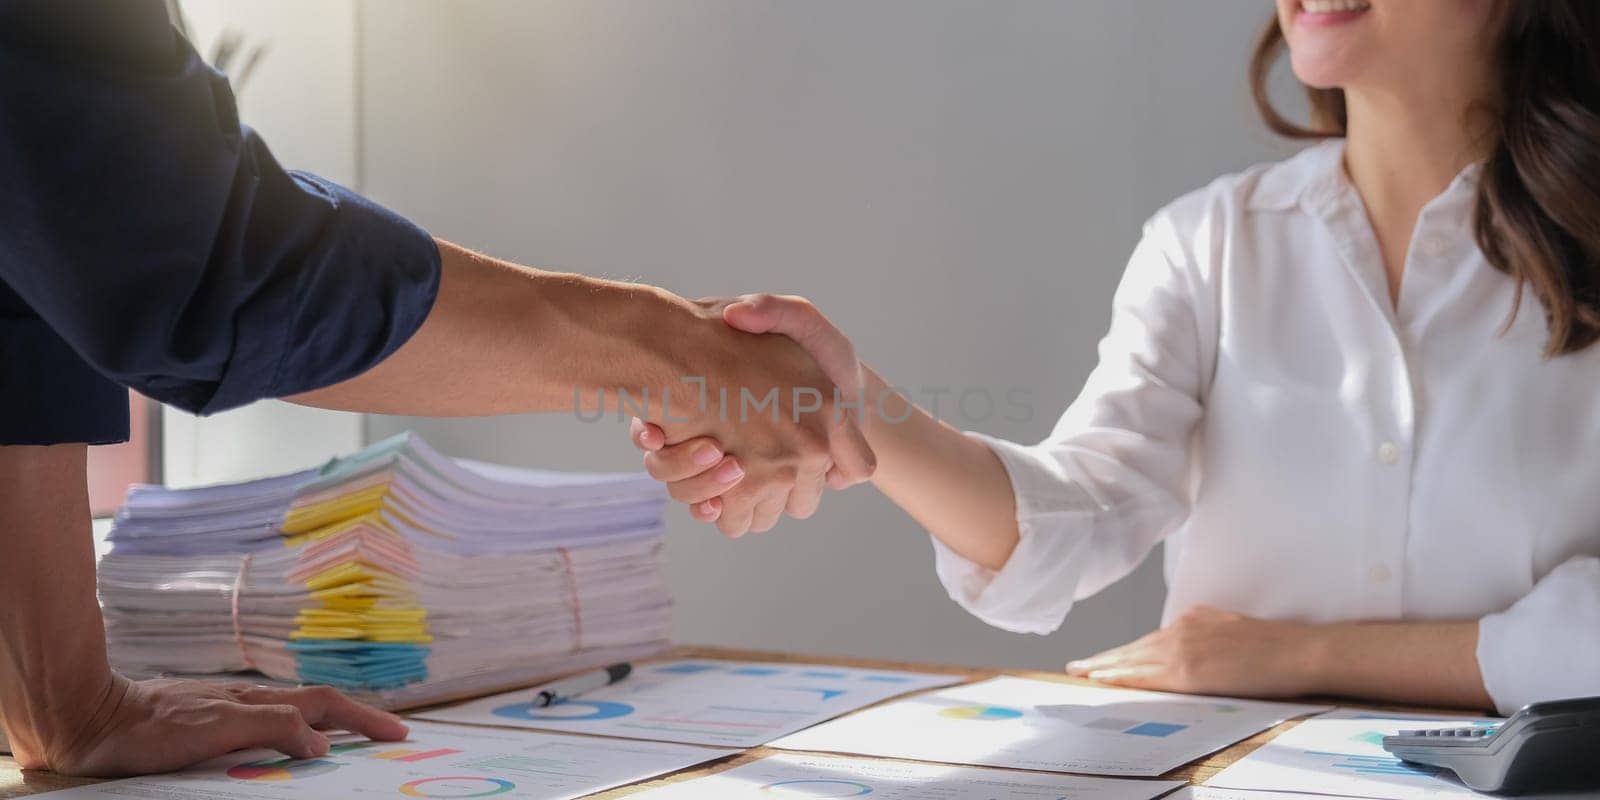 The business people shake hands after the meeting was successful and agreed upon.